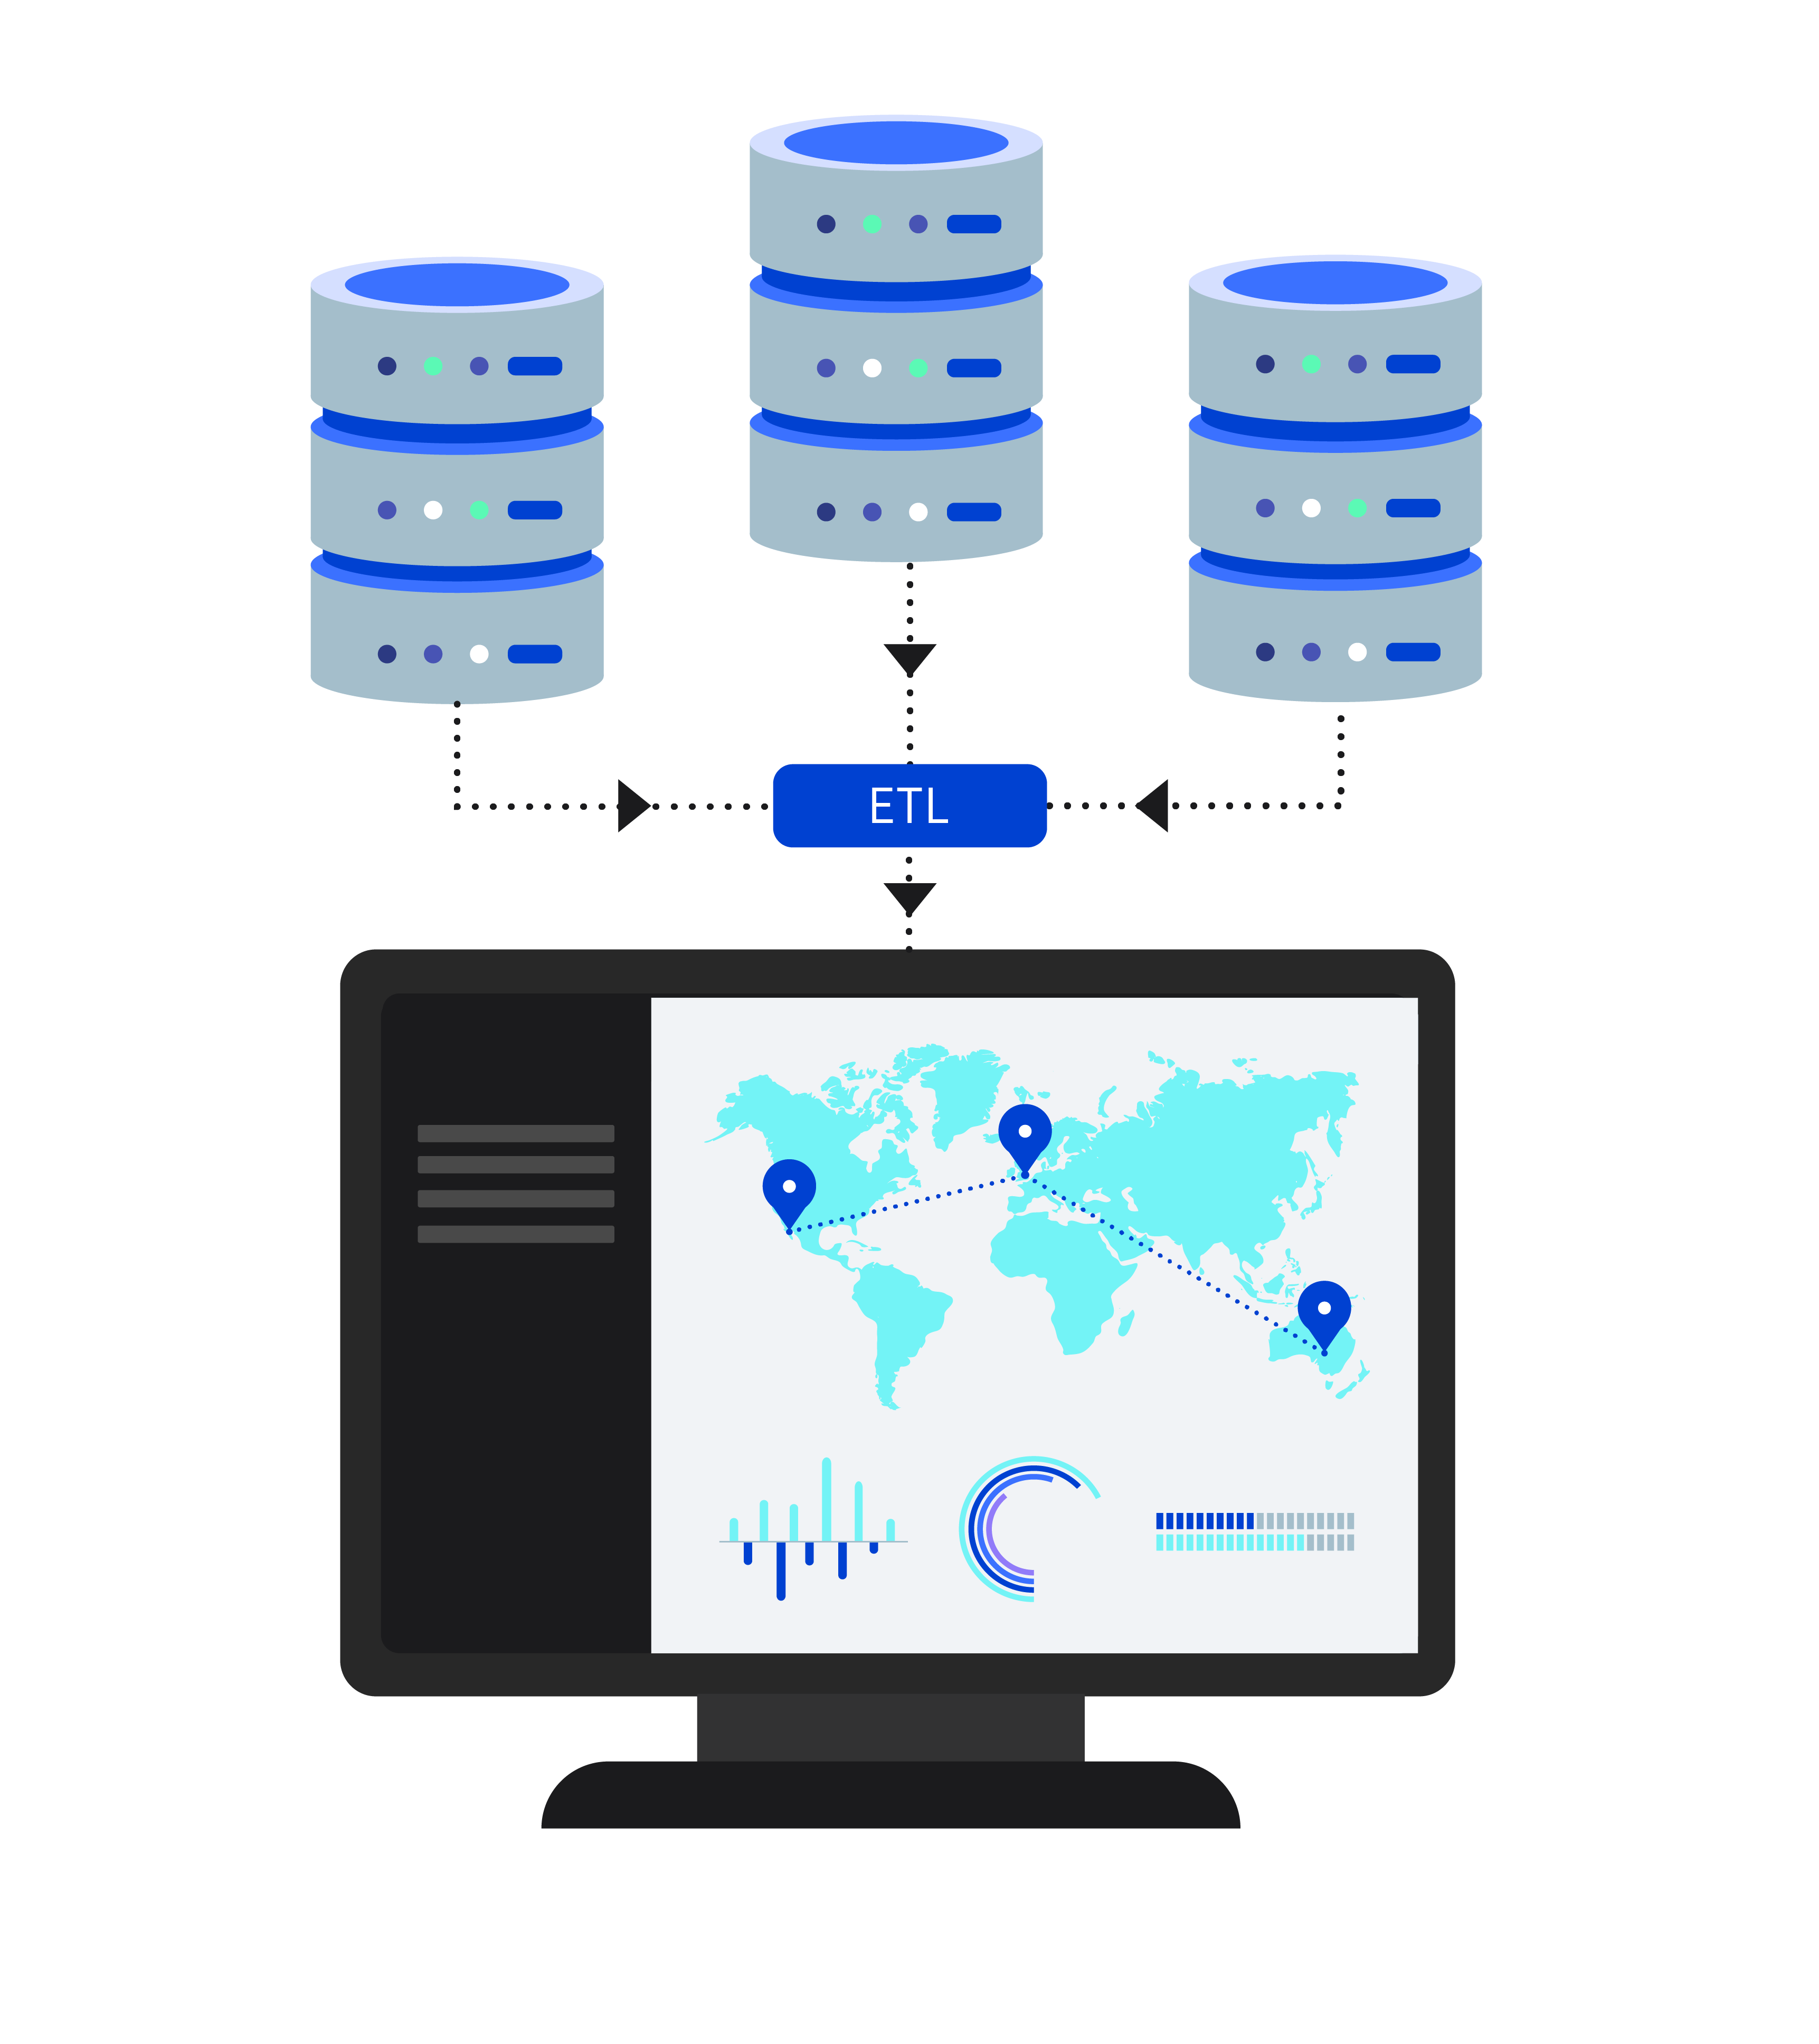 Graphic showing how data is extracted, transformed and loaded into a data warehouse